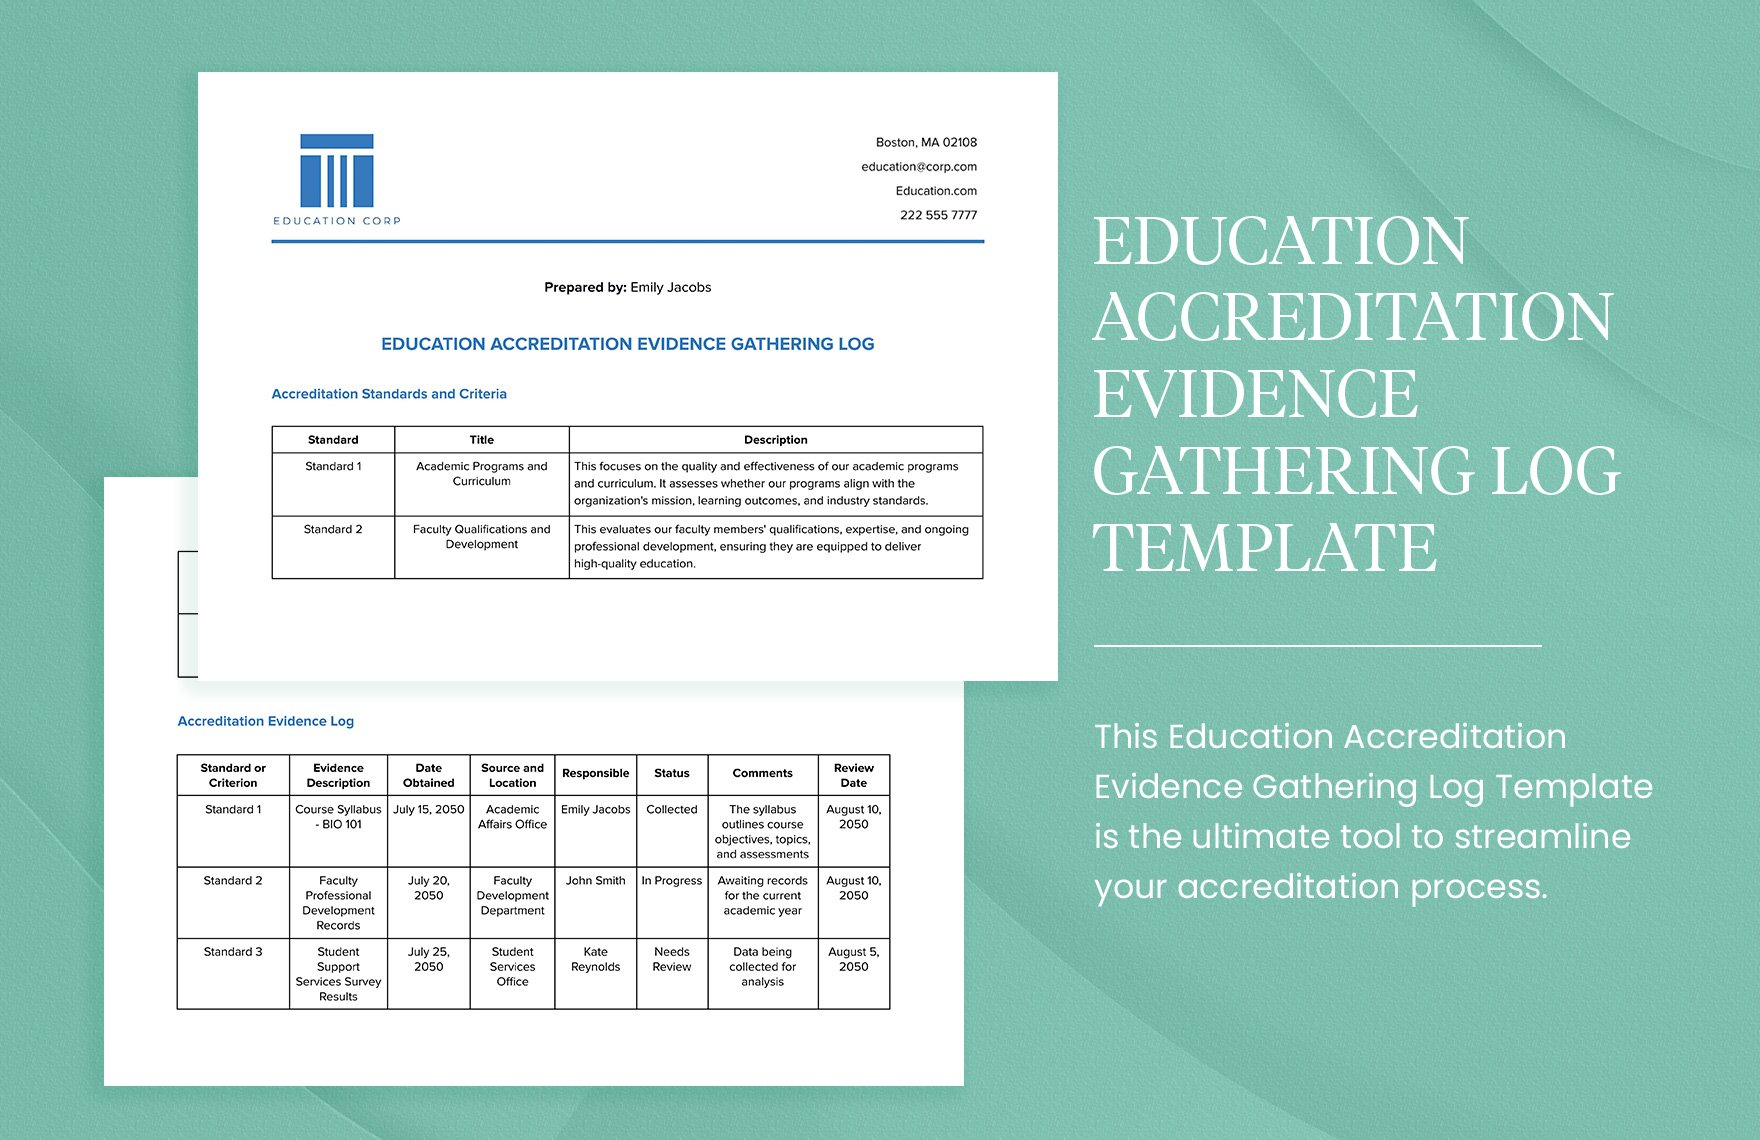 Education Accreditation Evidence Gathering Log Template in Word, Google Docs, PDF